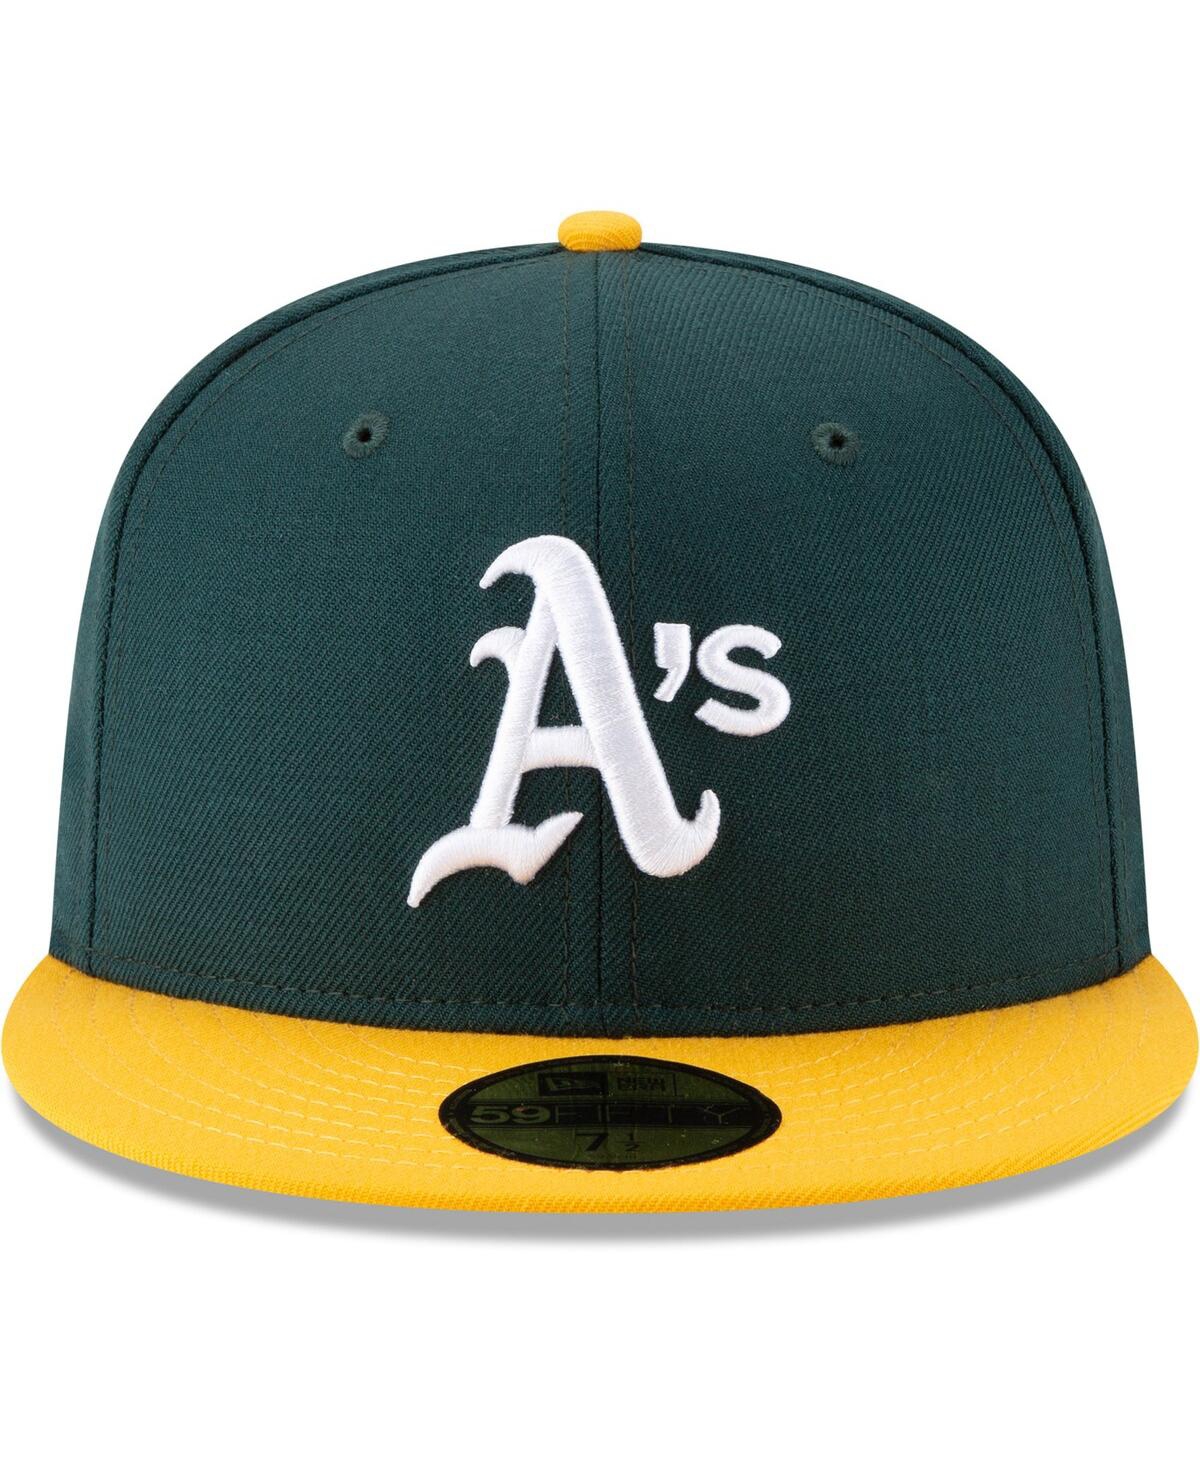 Shop New Era Men's  Green Oakland Athletics 1989 World Series Wool 59fifty Fitted Hat